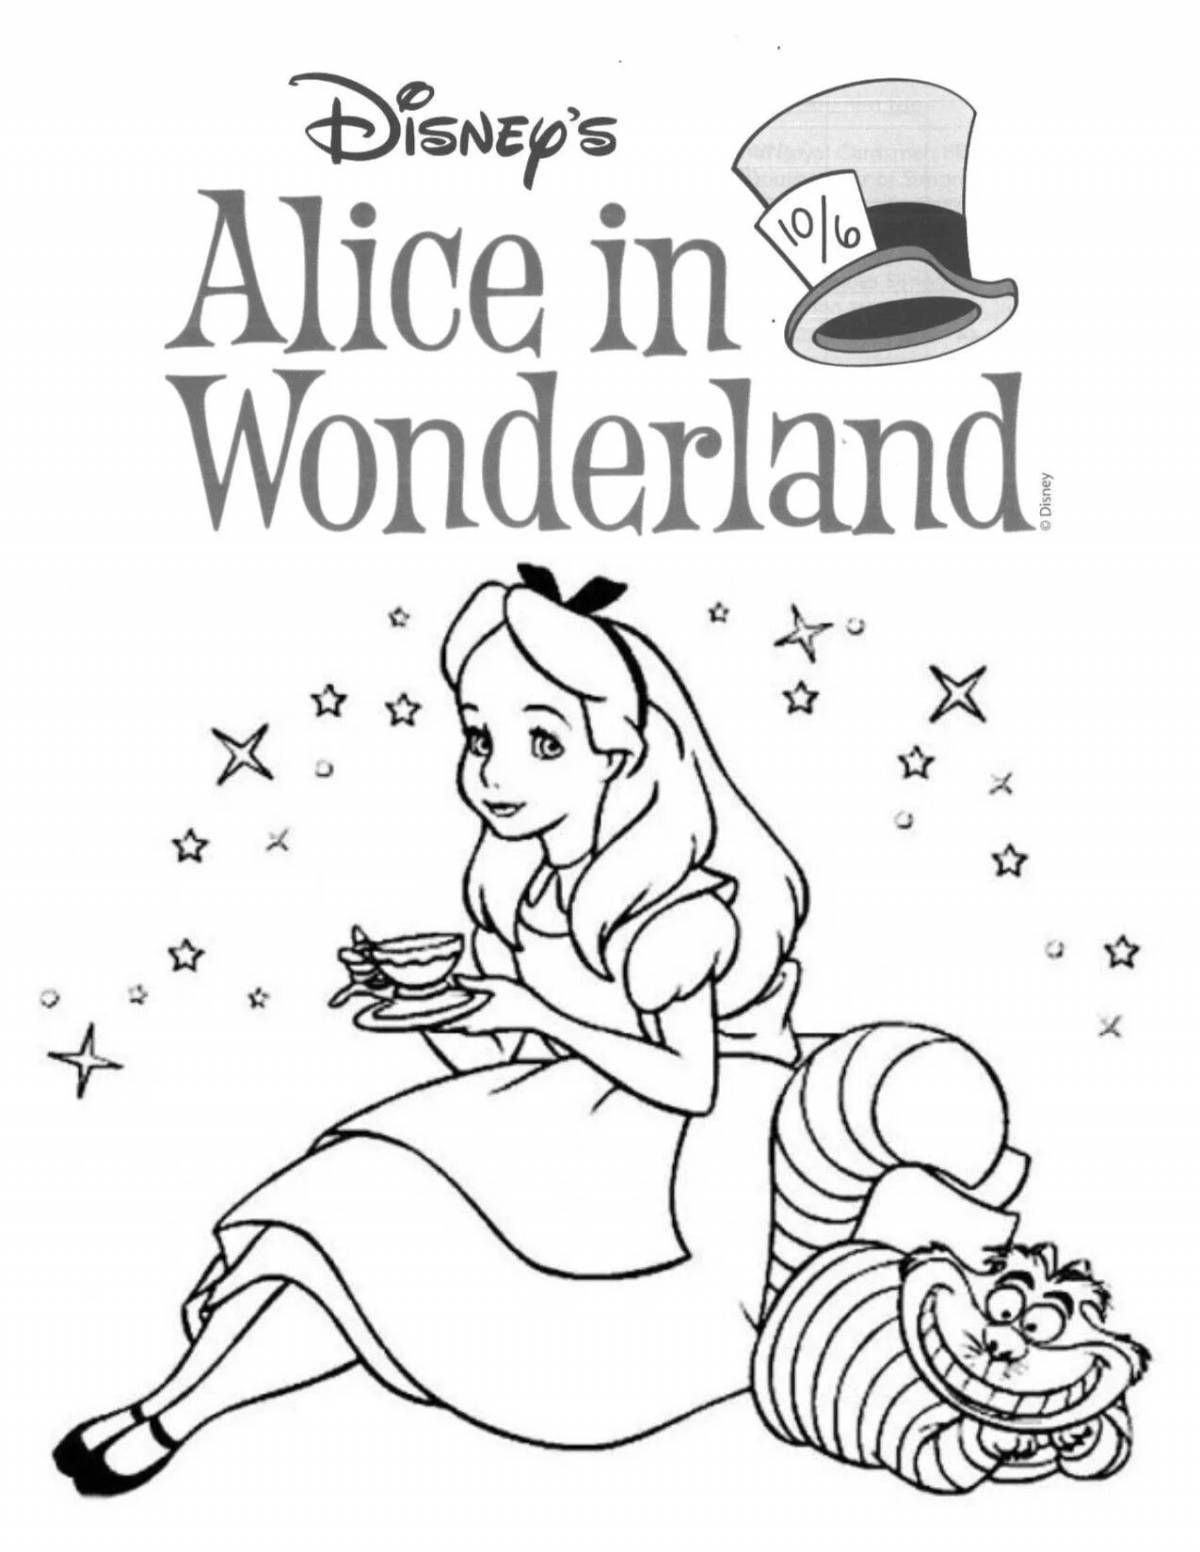 The incredible alice in wonderland disney coloring page